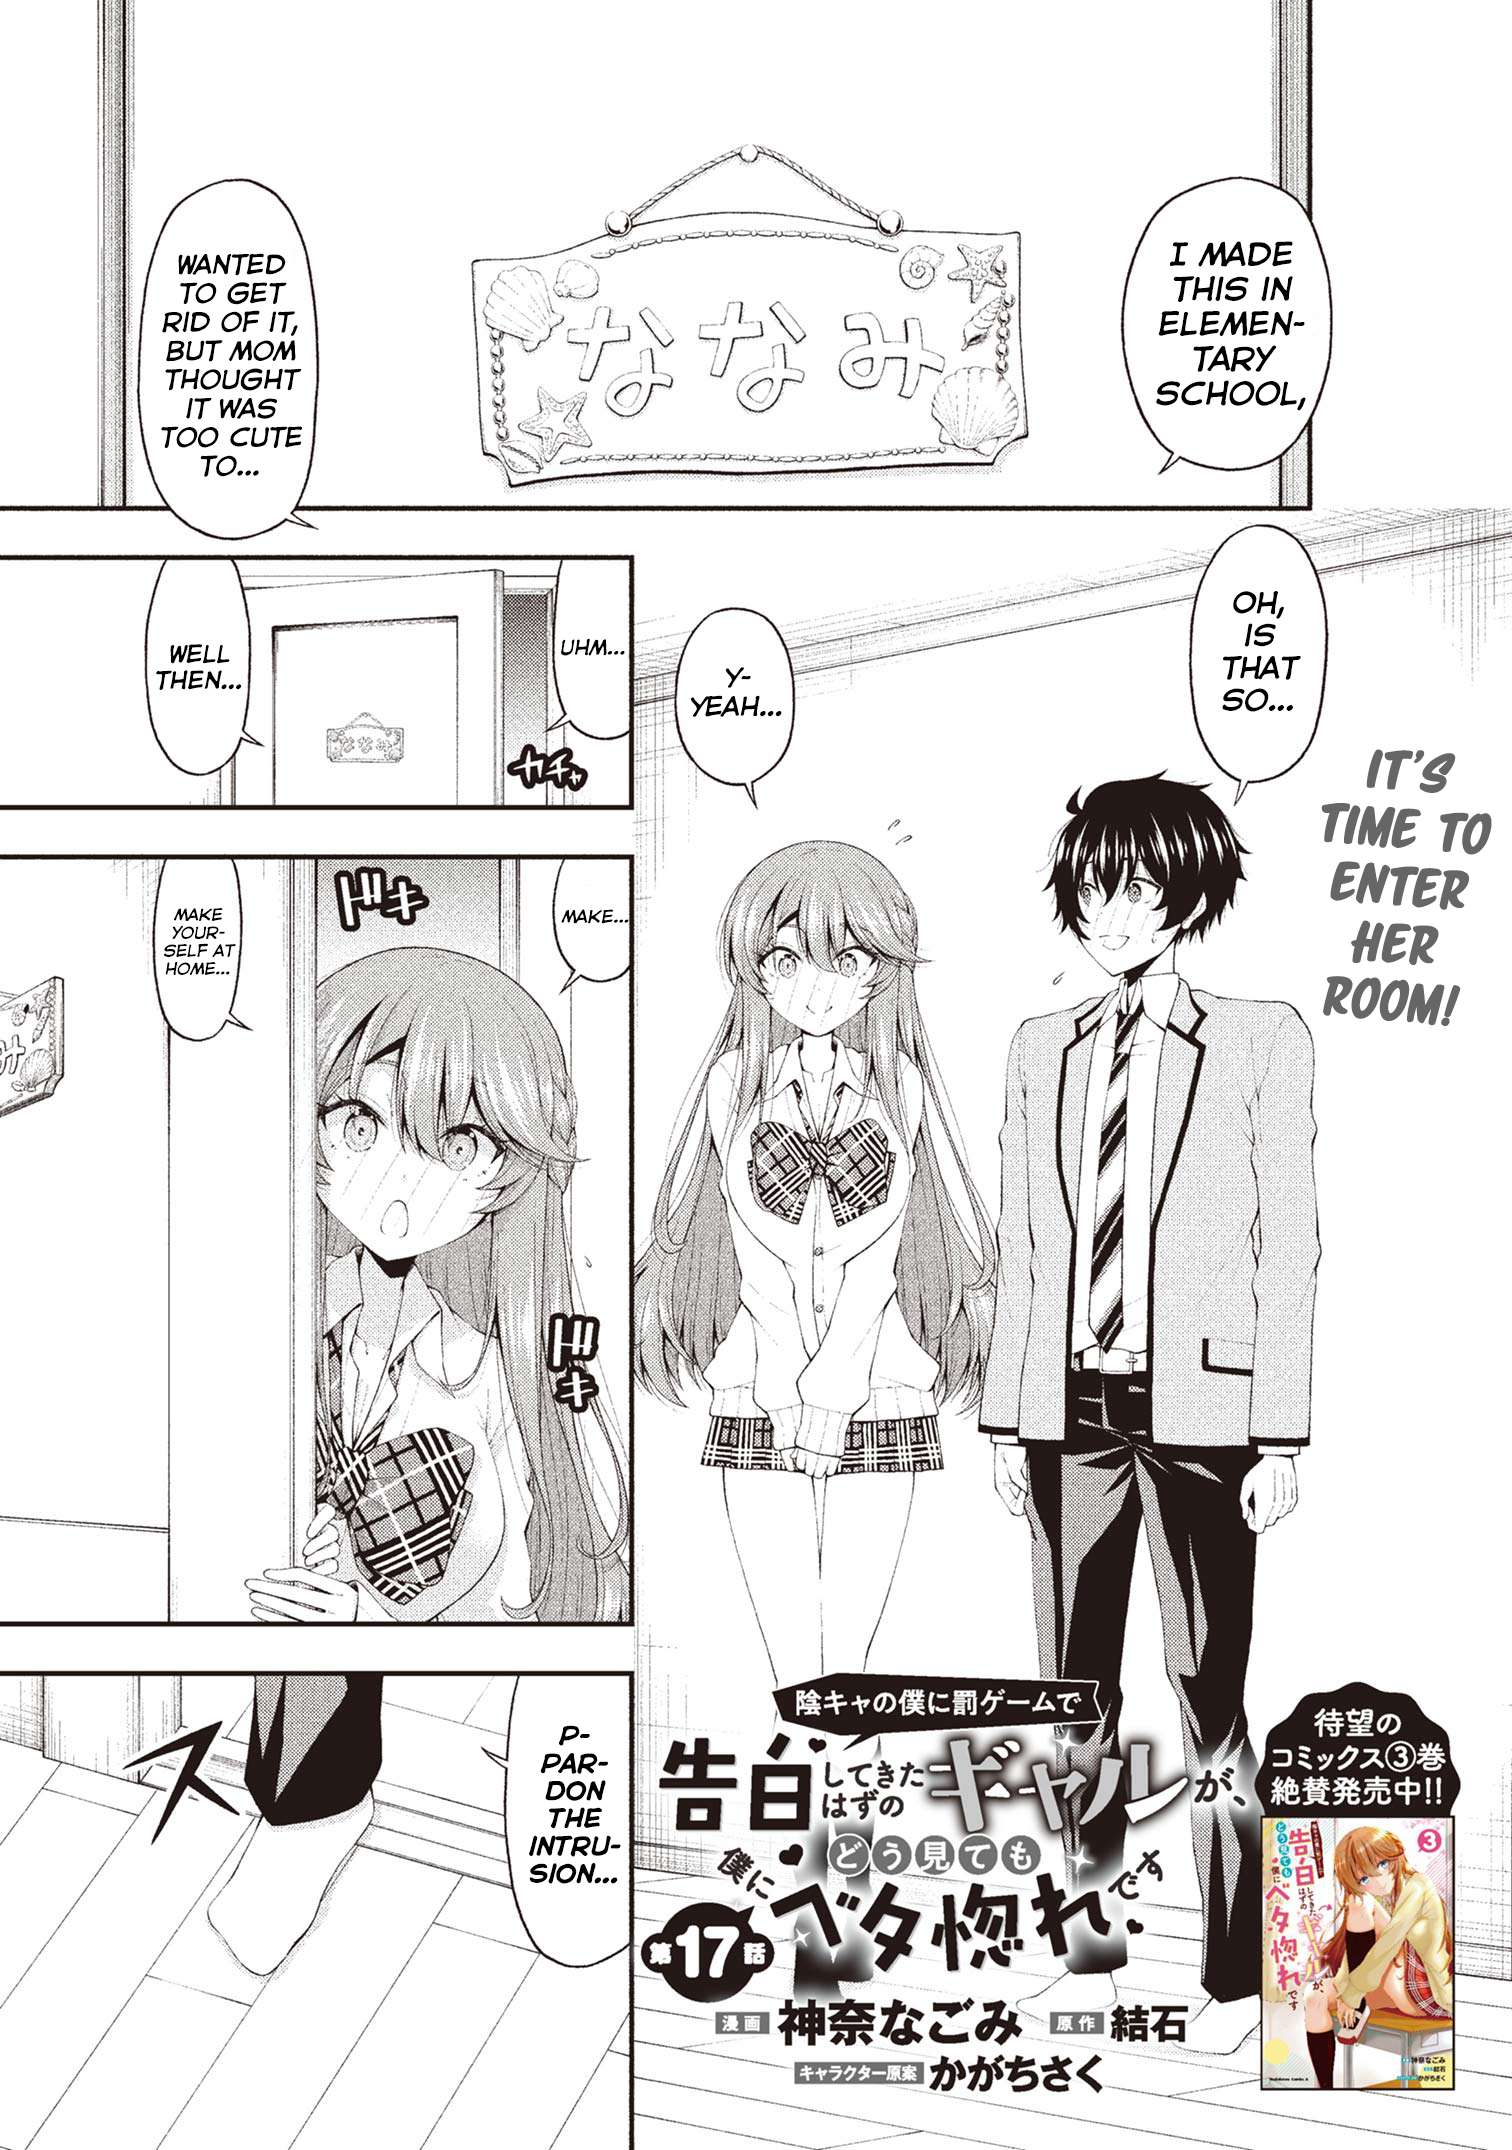 The Gal Who Was Meant to Confess to Me as a Game Punishment - chapter 17 - #1